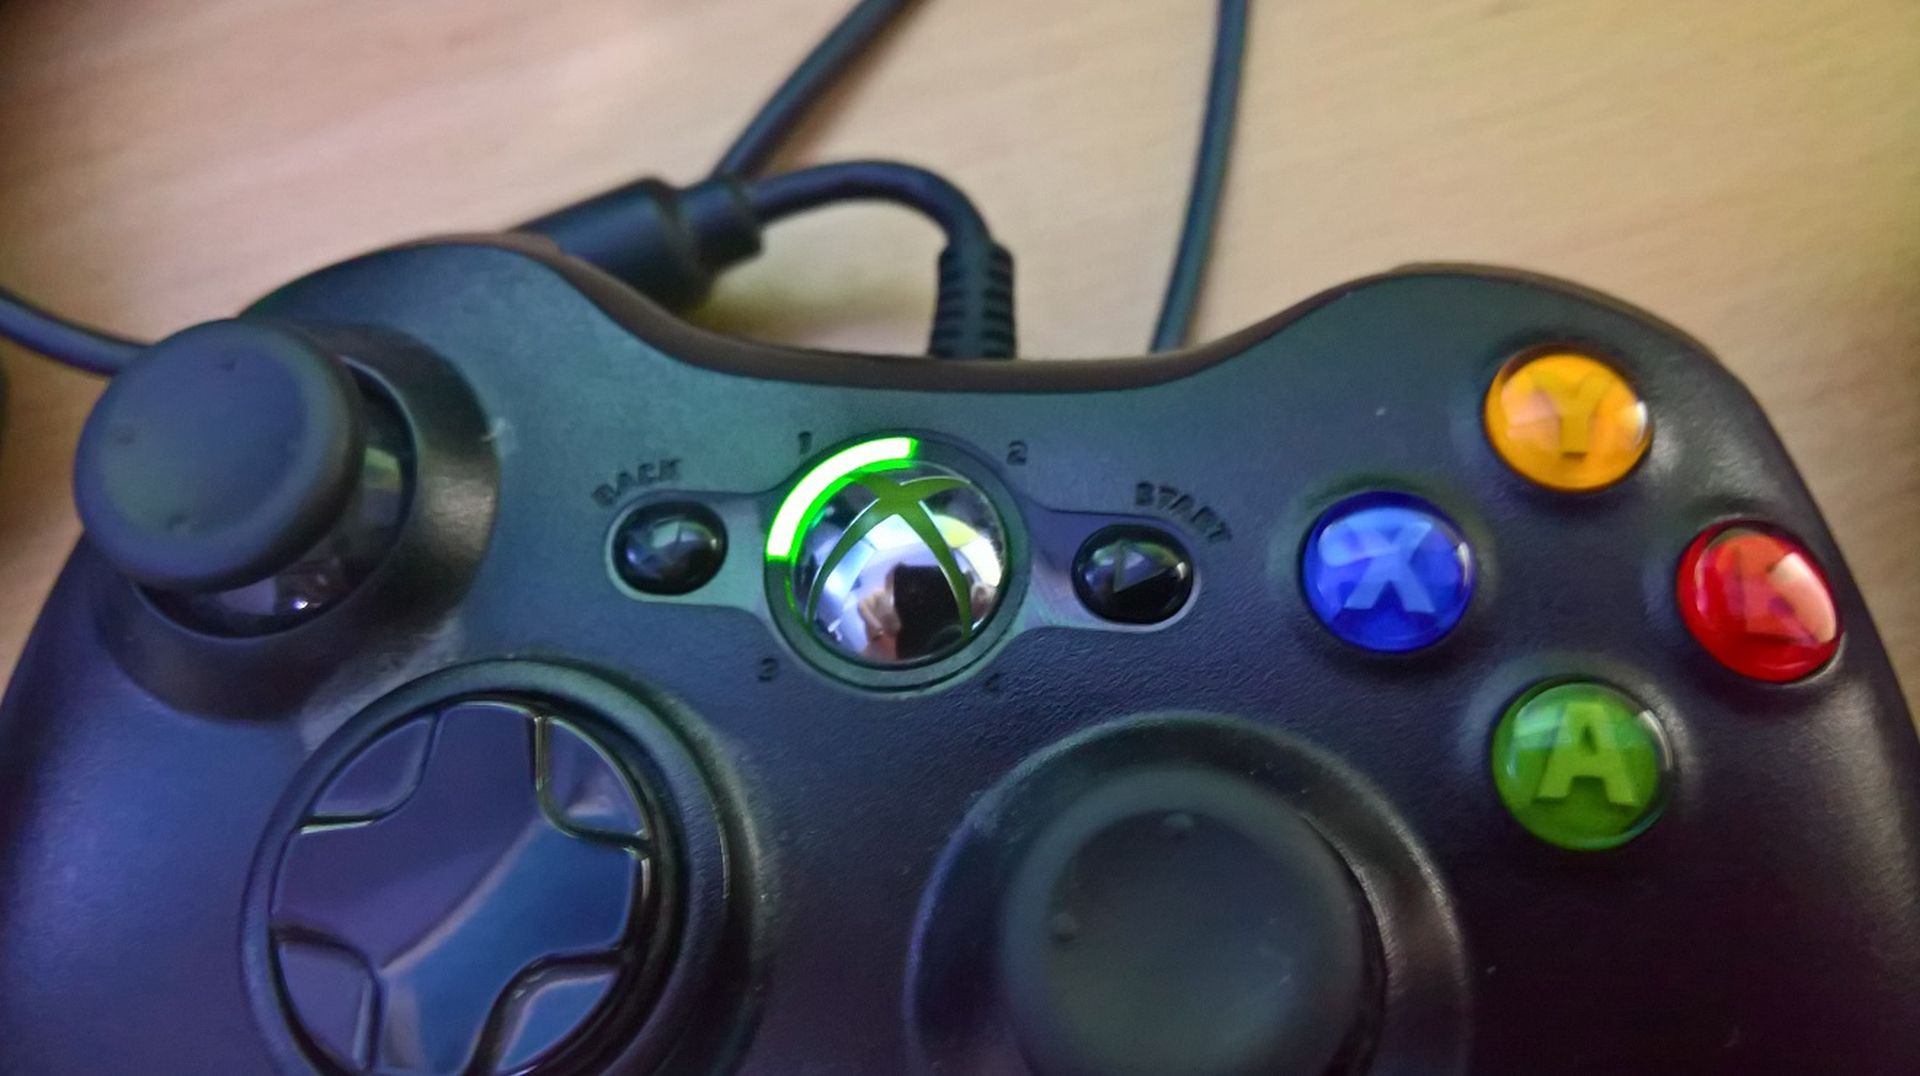 How to connect Xbox 360 controller to PC?